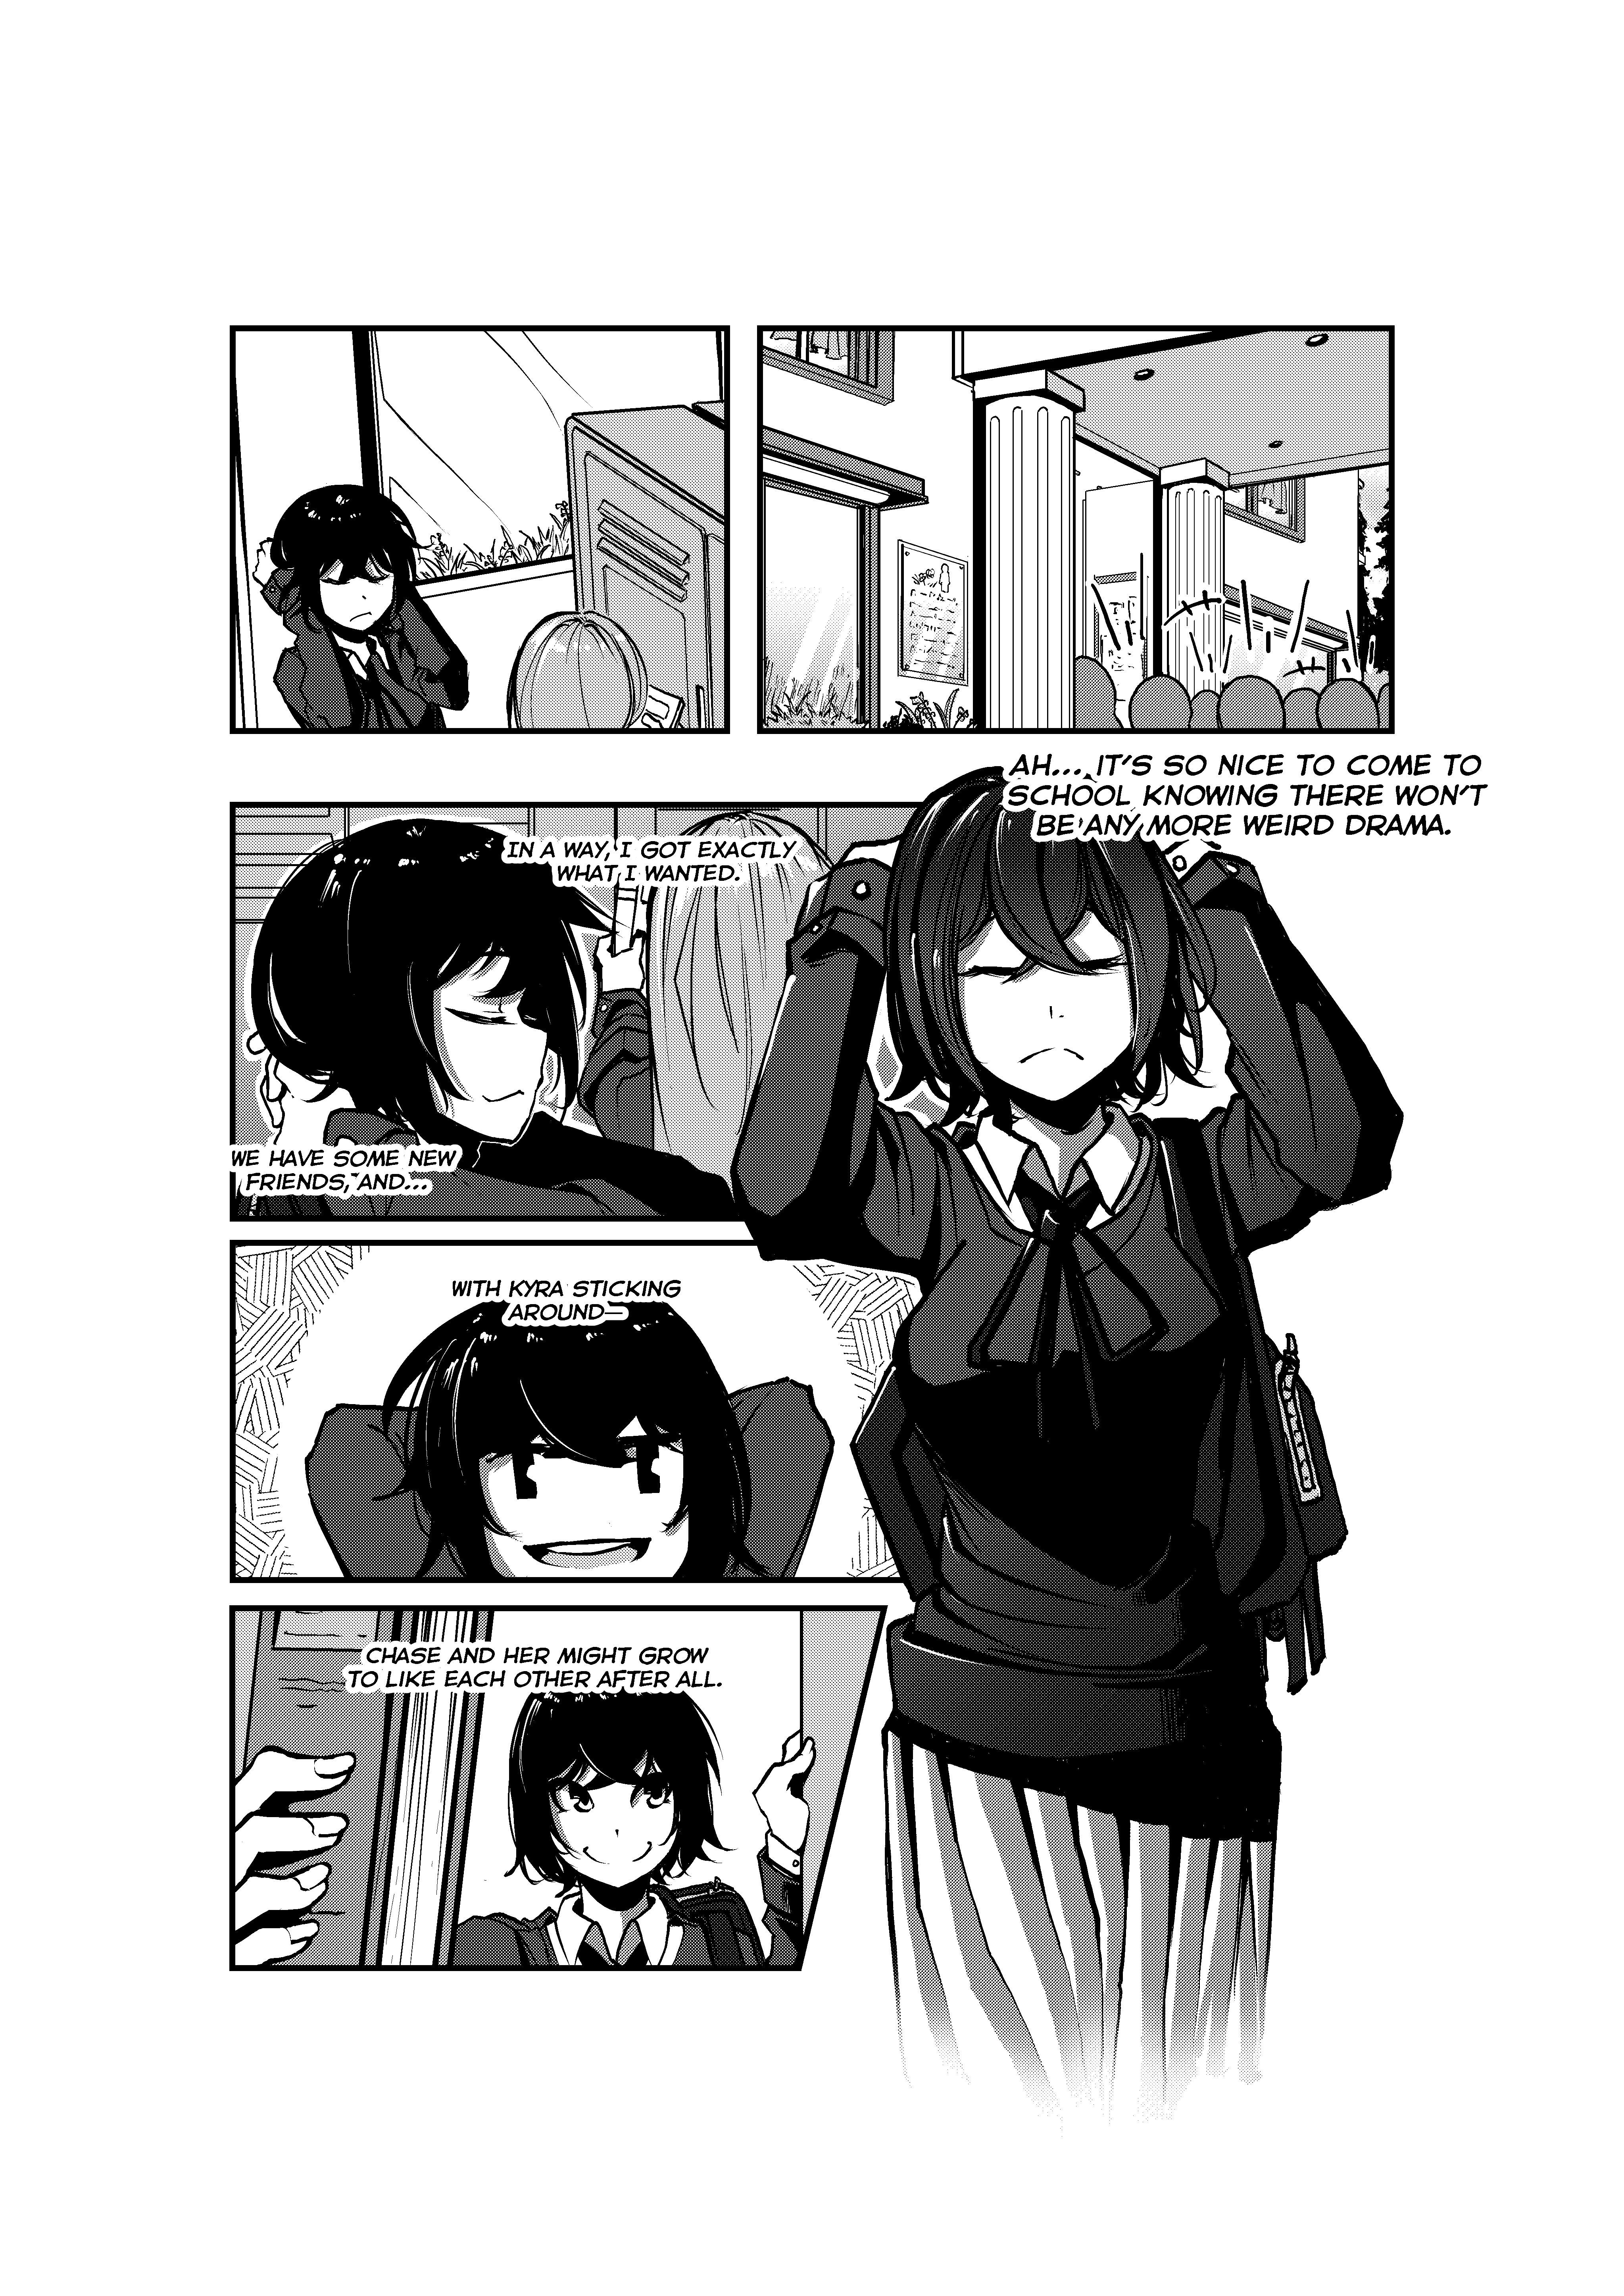 Opposites In Disguise - 19 page 2-95c07056